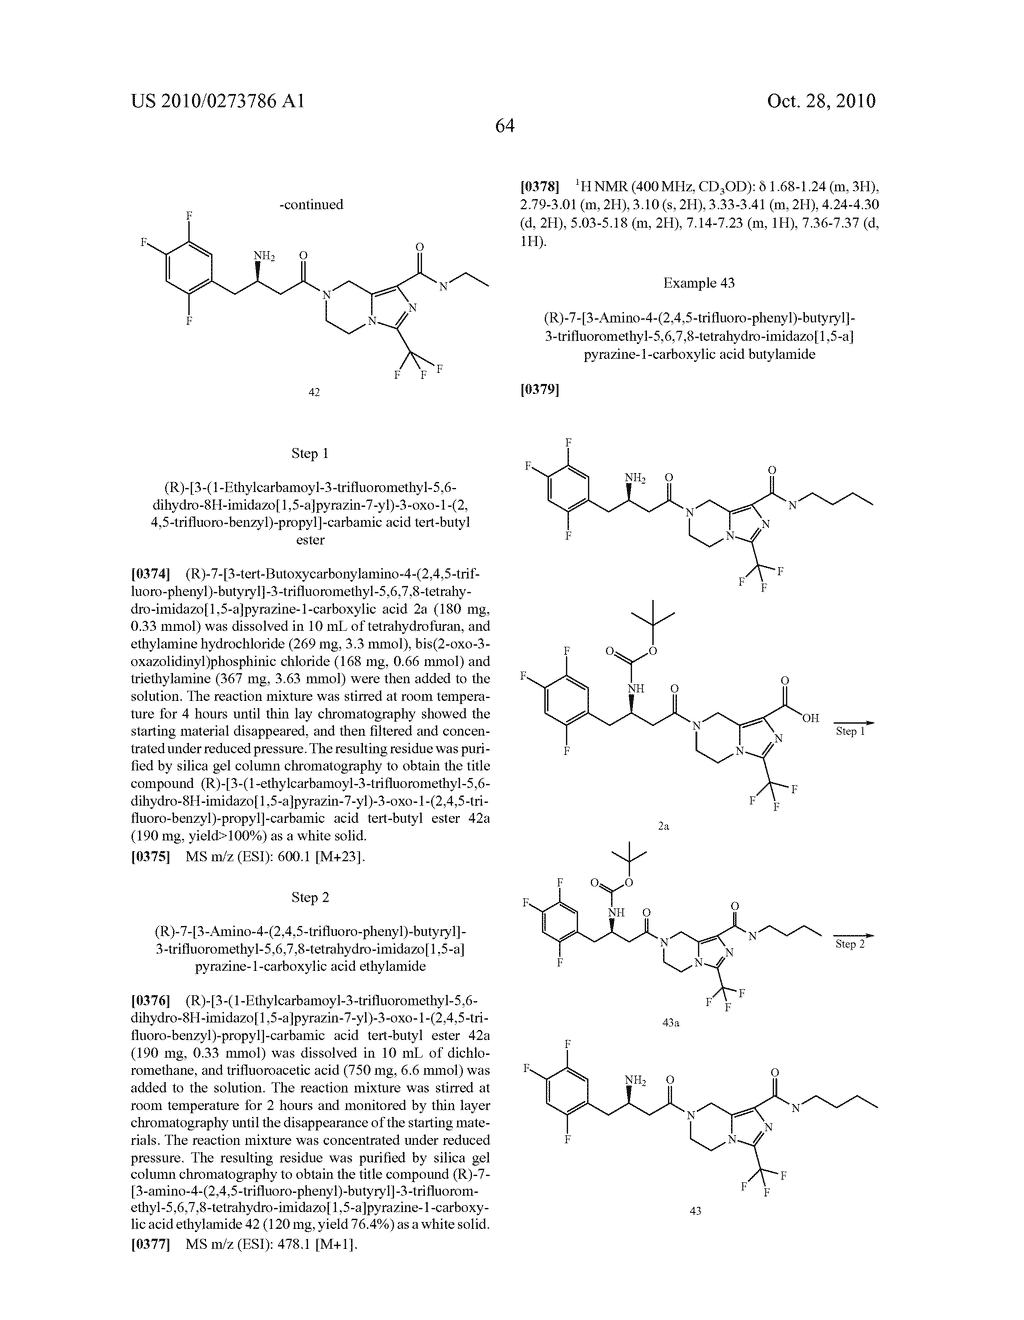 TETRAHYDRO-IMIDAZ0[1,5-A]PYRAZINE DERIVATIVES, PREPARATION PROCESS AND MEDICINAL USE THEREOF - diagram, schematic, and image 65